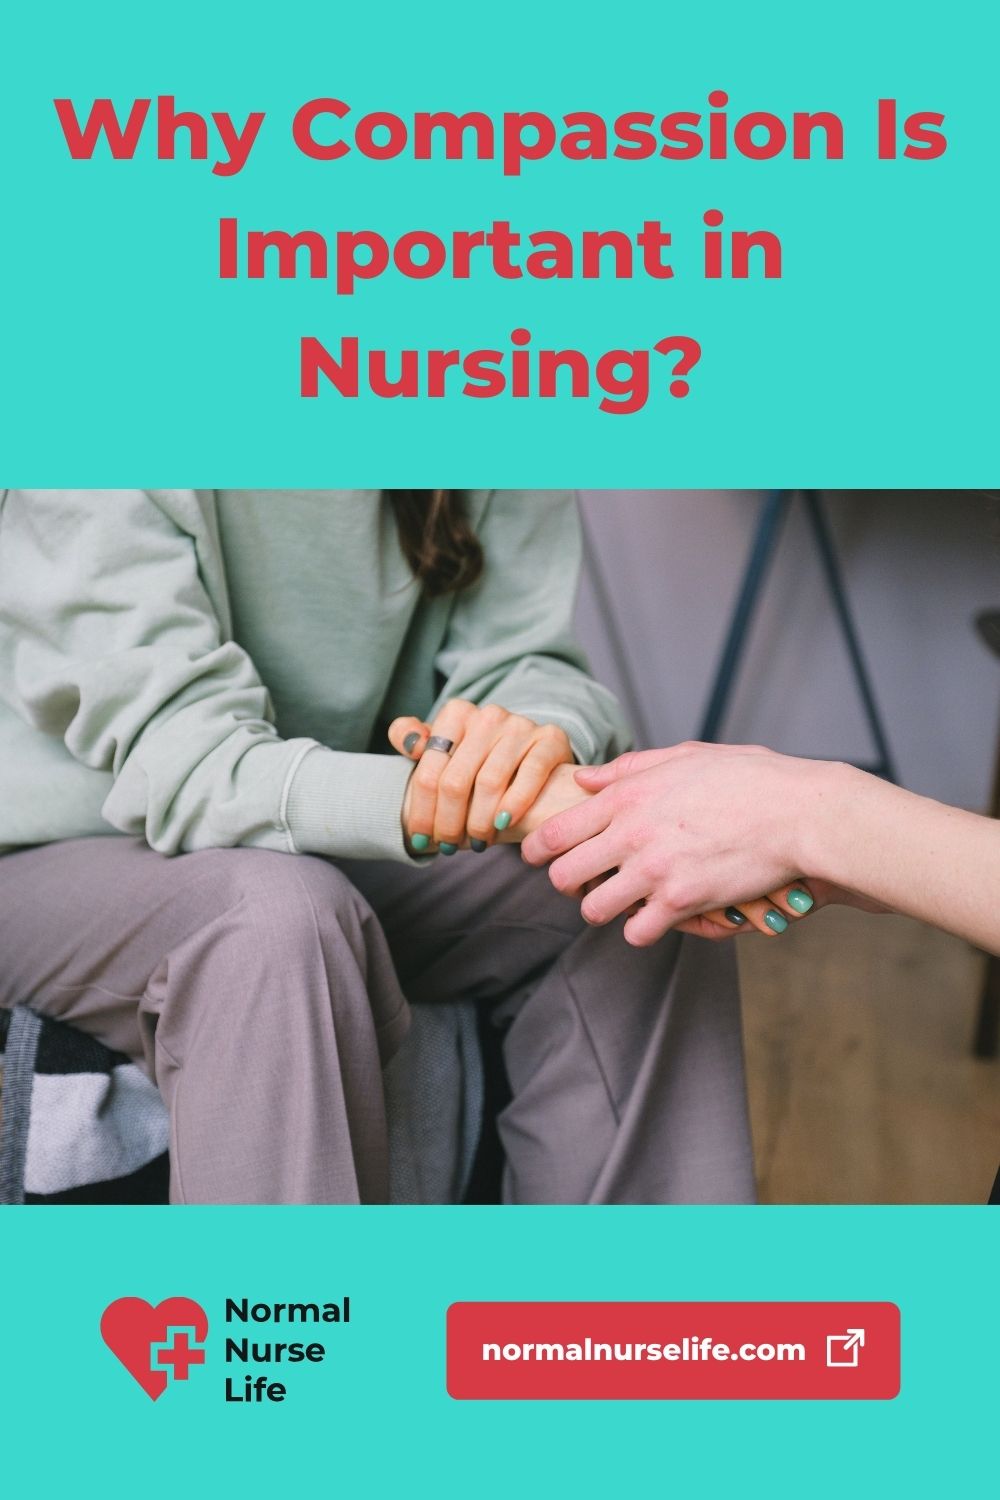 Why is compassion important in nursing